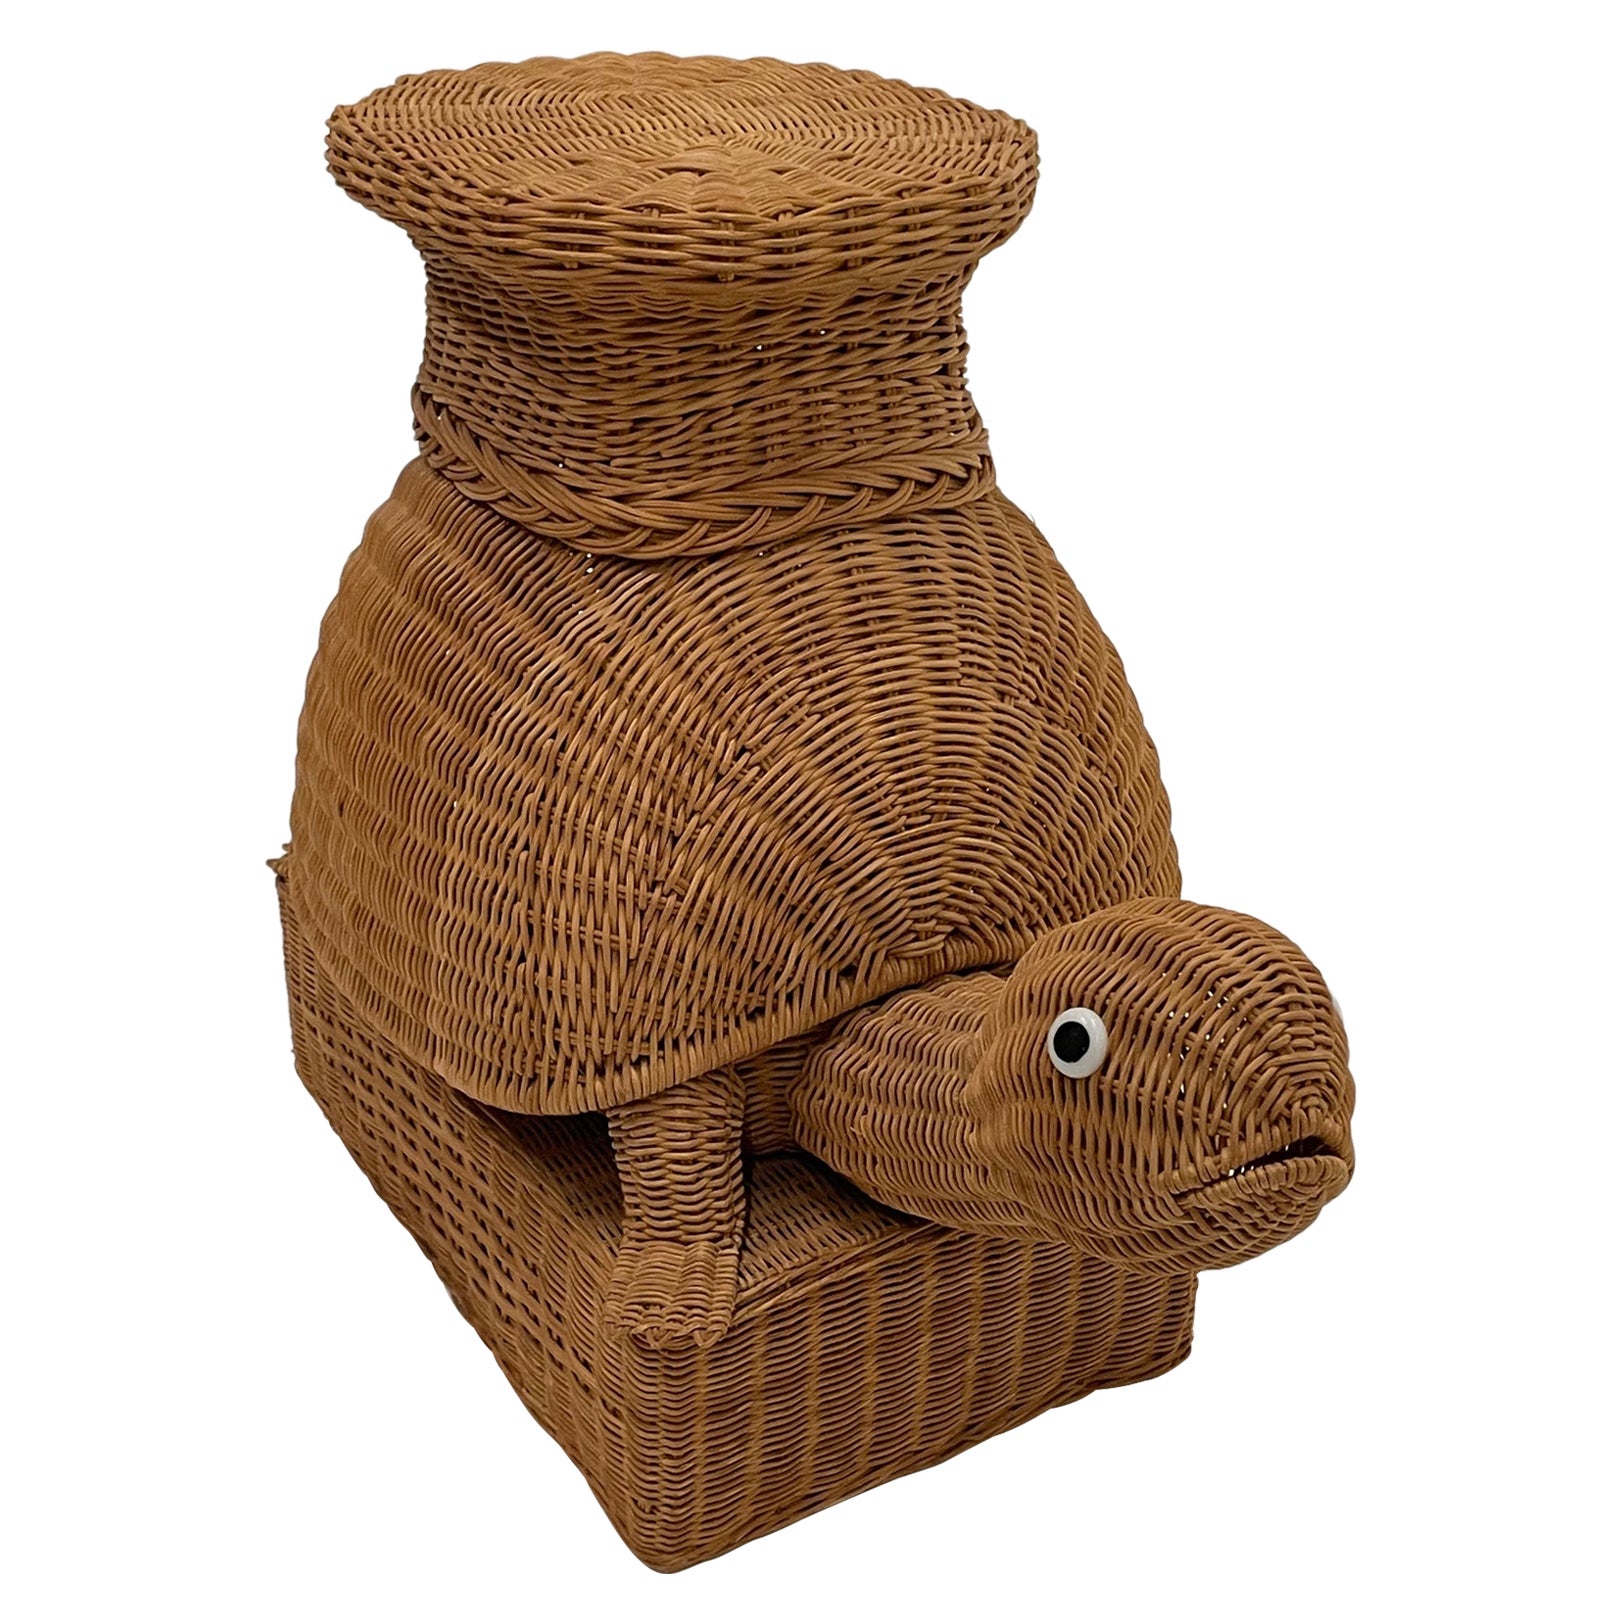 Adorable Vintage Wicker Turtle Shaped End Table For Sale